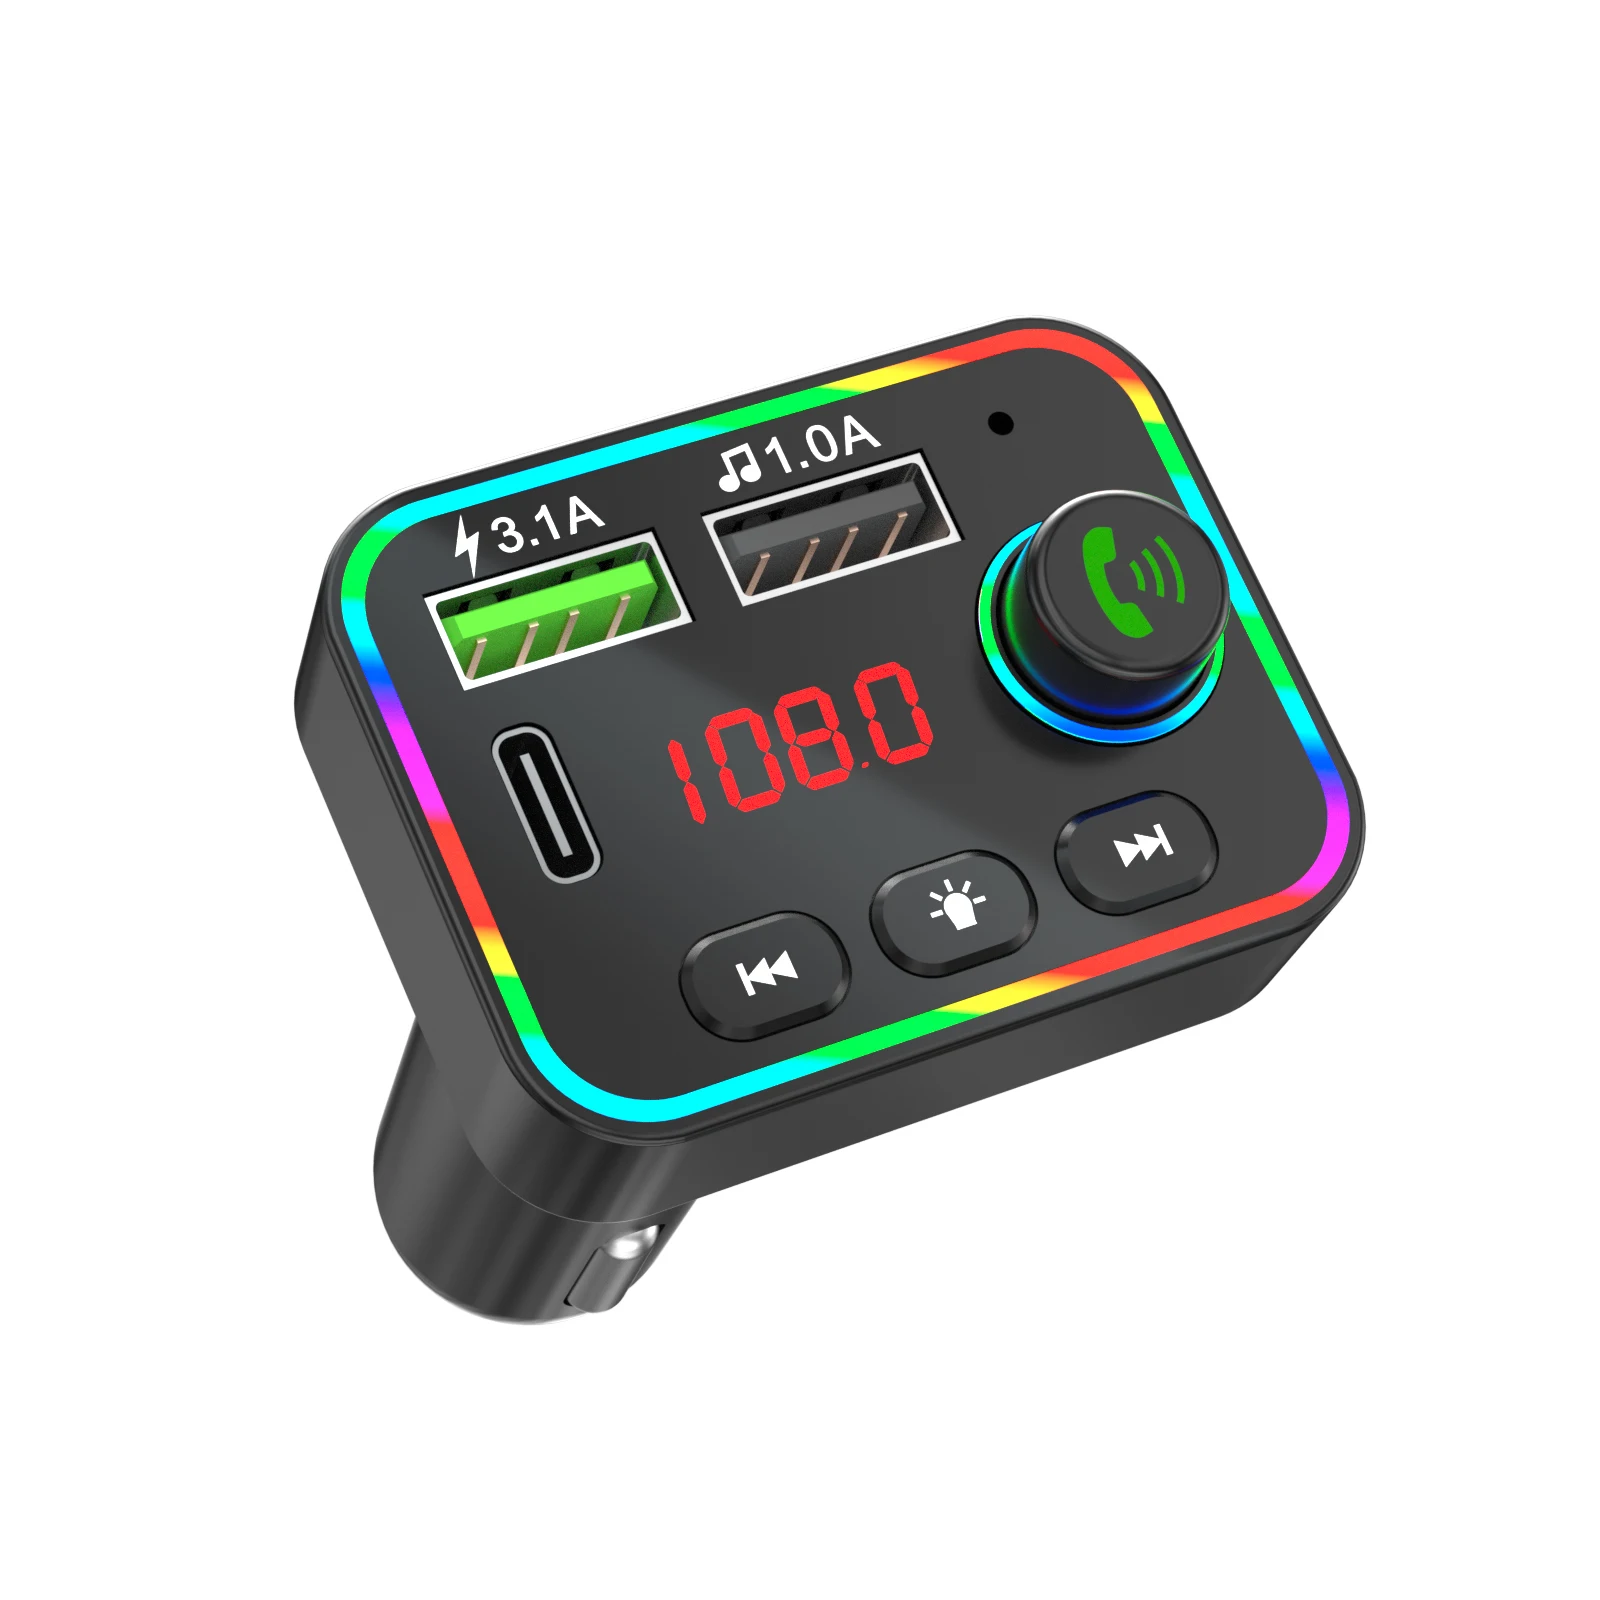 

F4 New FM Transmitter Blue tooth PD Dual USB 3.1A Car Charger Handsfree TF Card U-Disk AUX Music Playing Kit Cargador tipo c